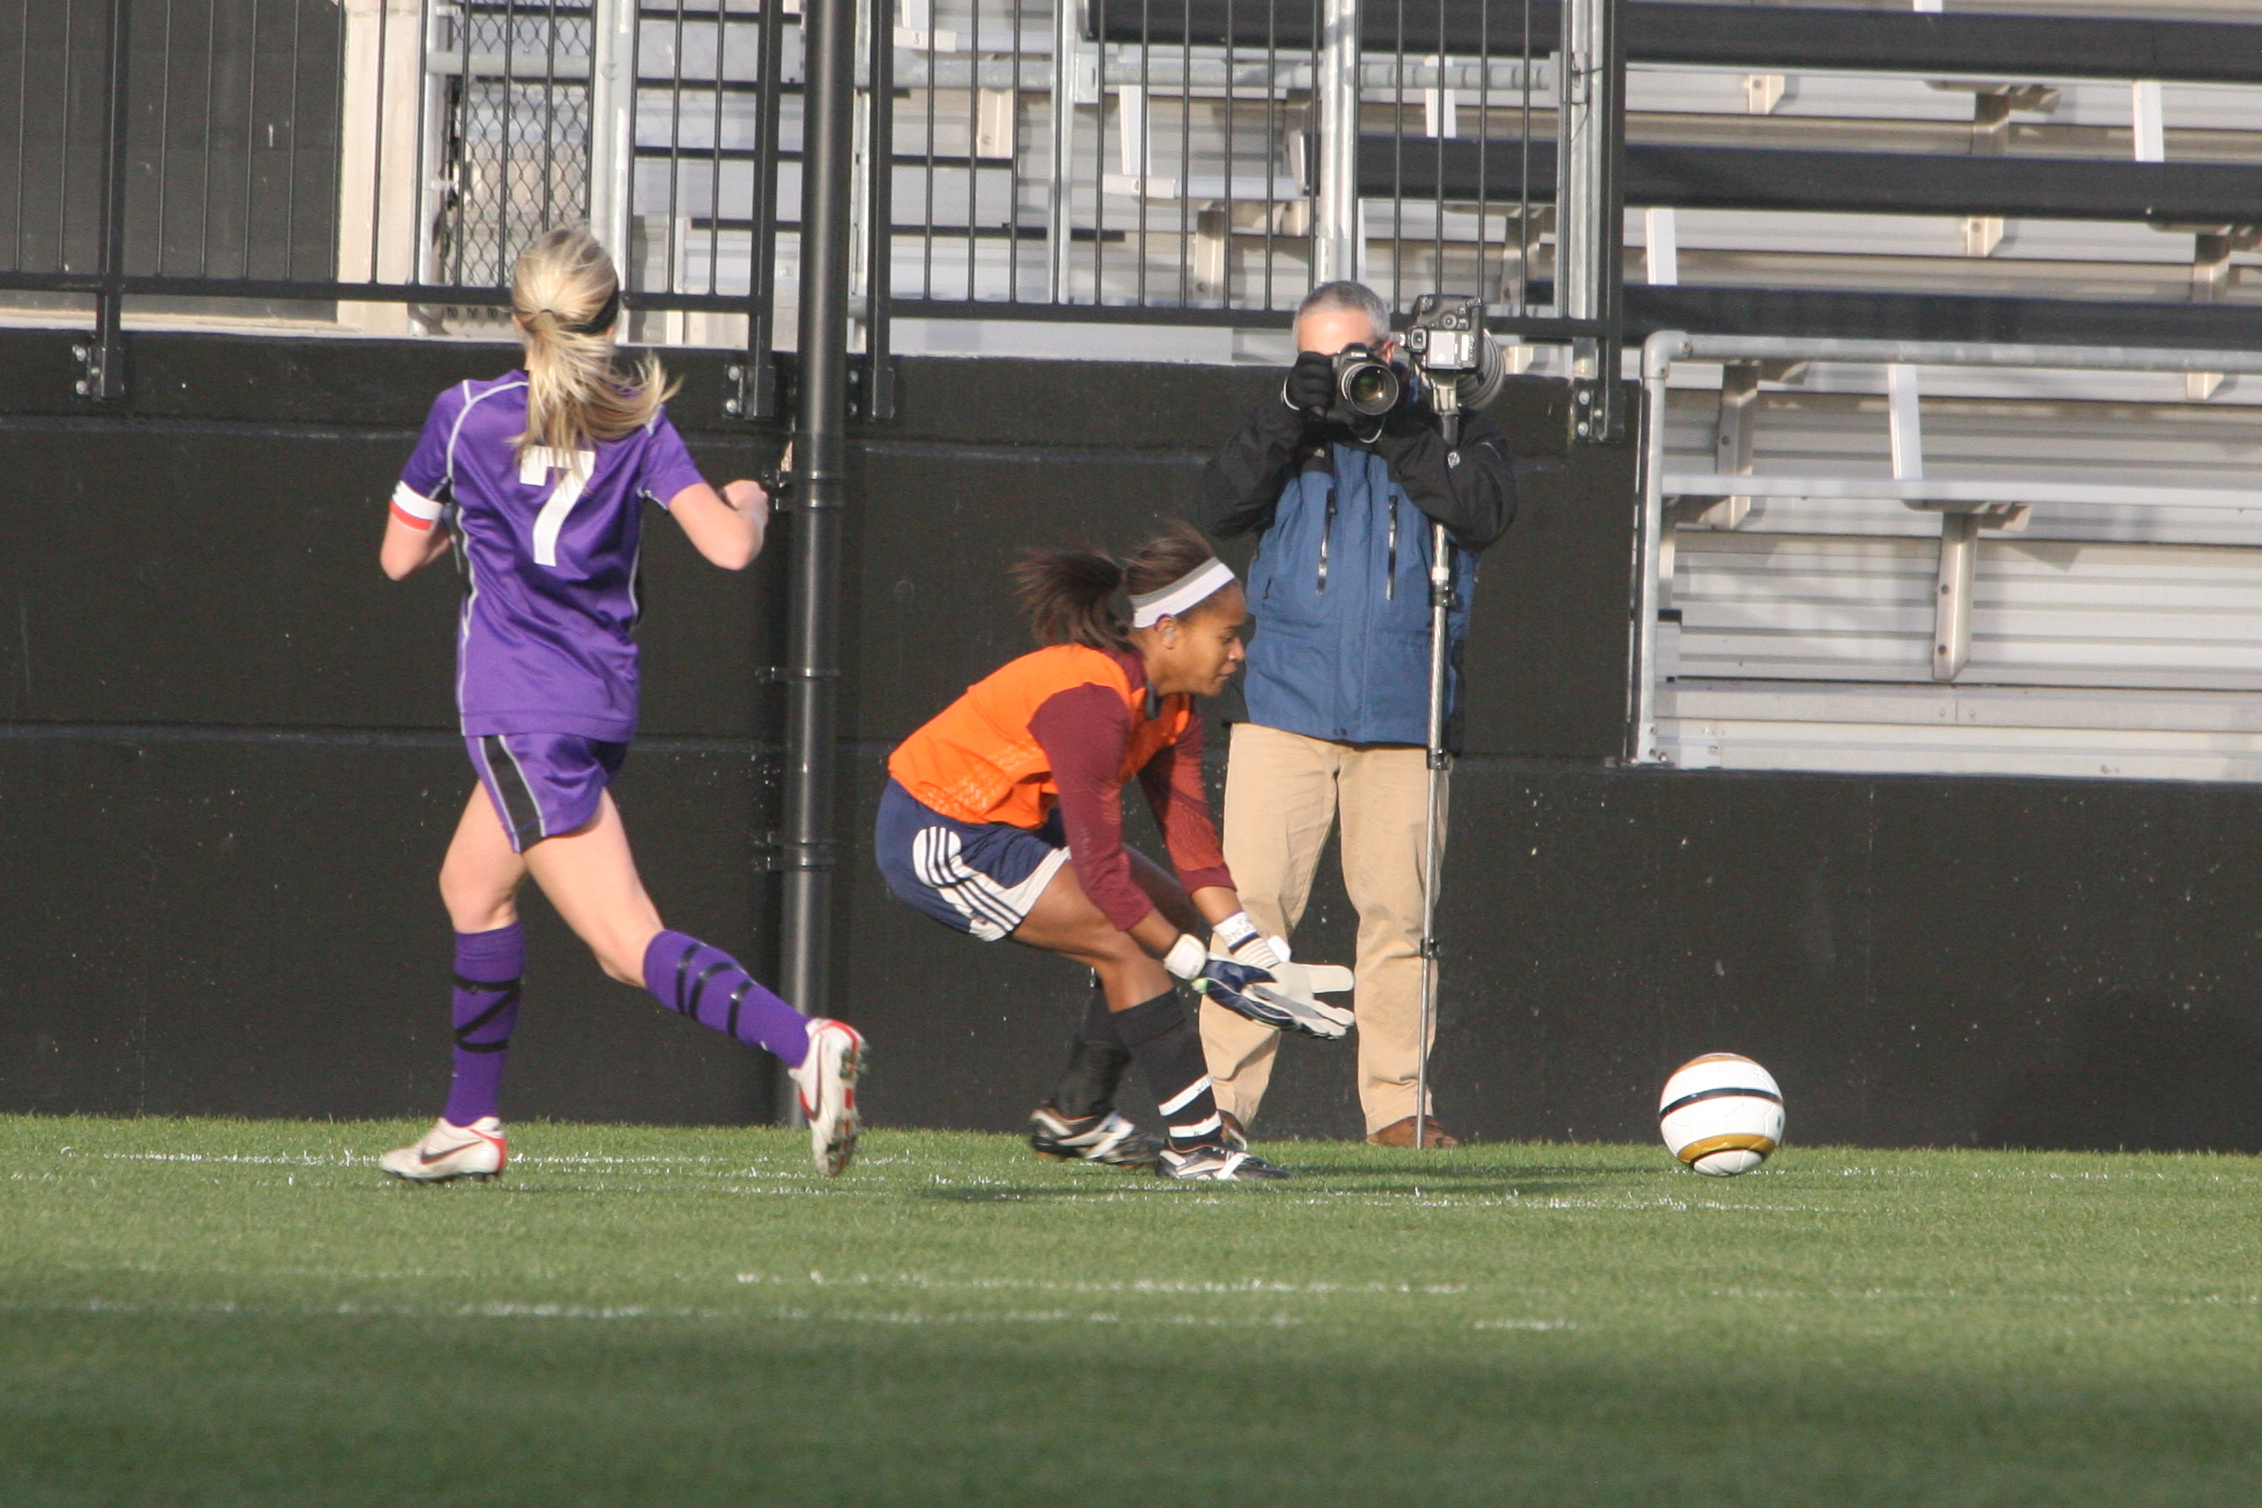 Goalkeeper Becca Dowling-Fitzpatrick collects the ball in the state title game